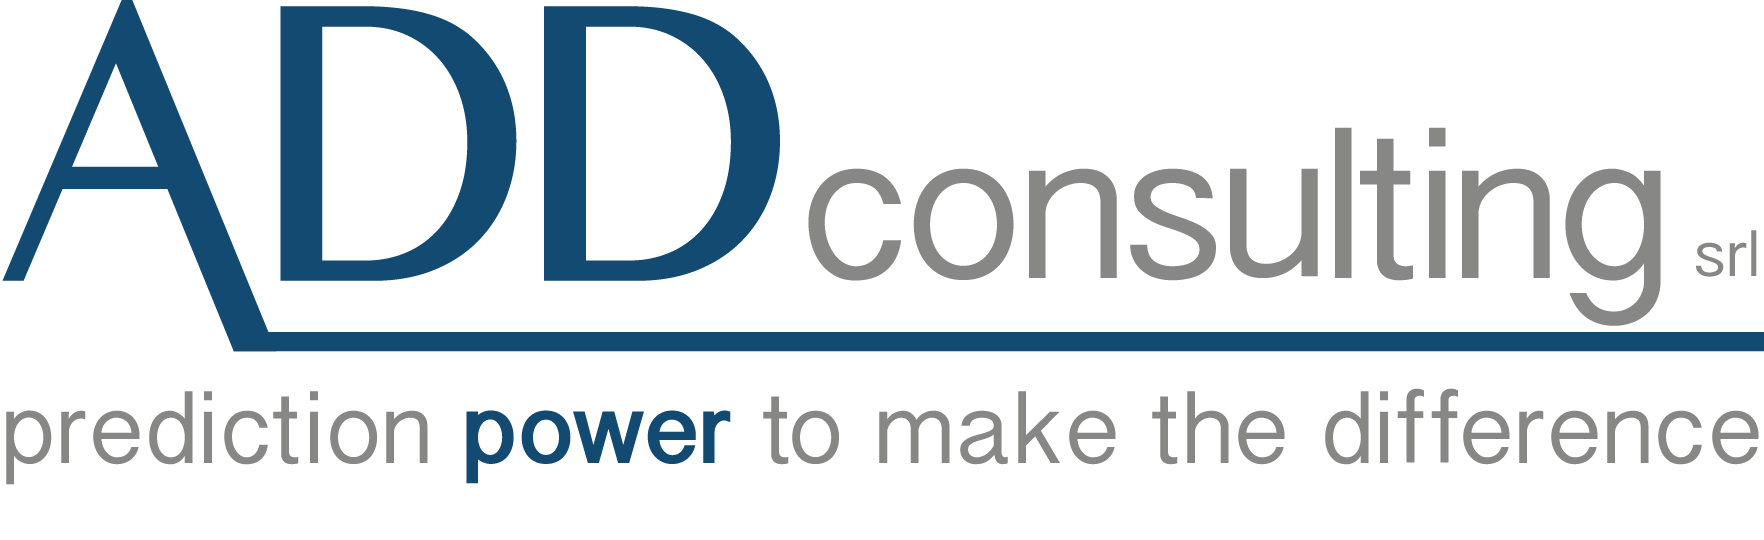 ADD Consulting srl